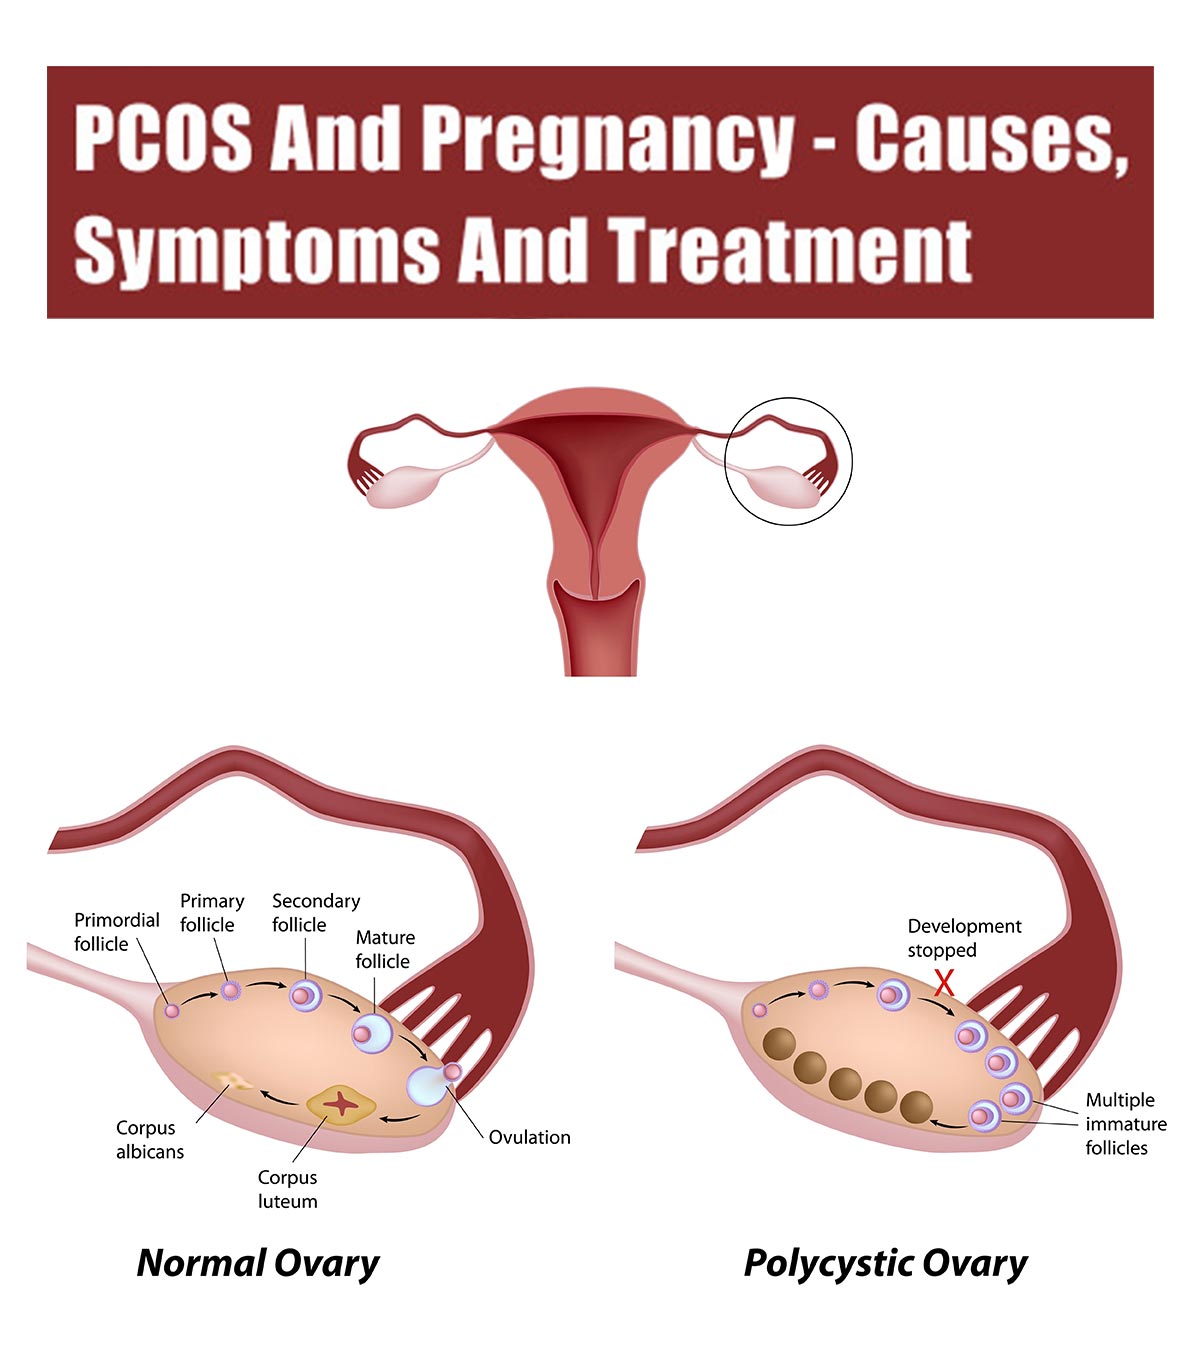 PCOS And Pregnancy: Causes, Symptoms And Treatment